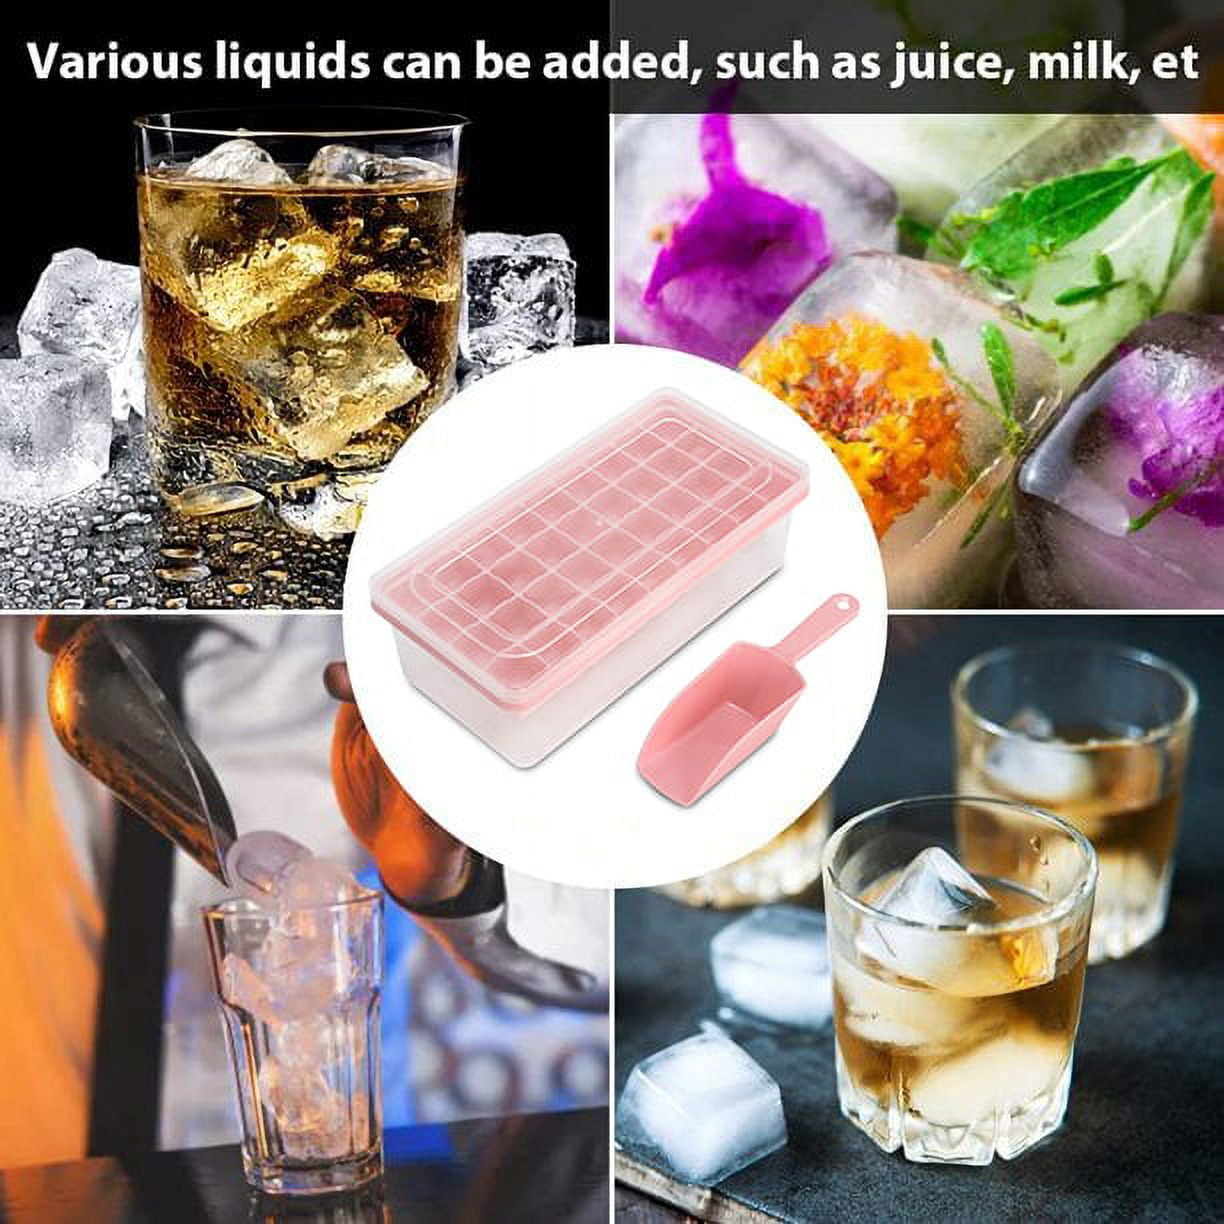 Ice Cube Tray With Lid And Storage Bin For Freezer,36/72 2-3cm Ice